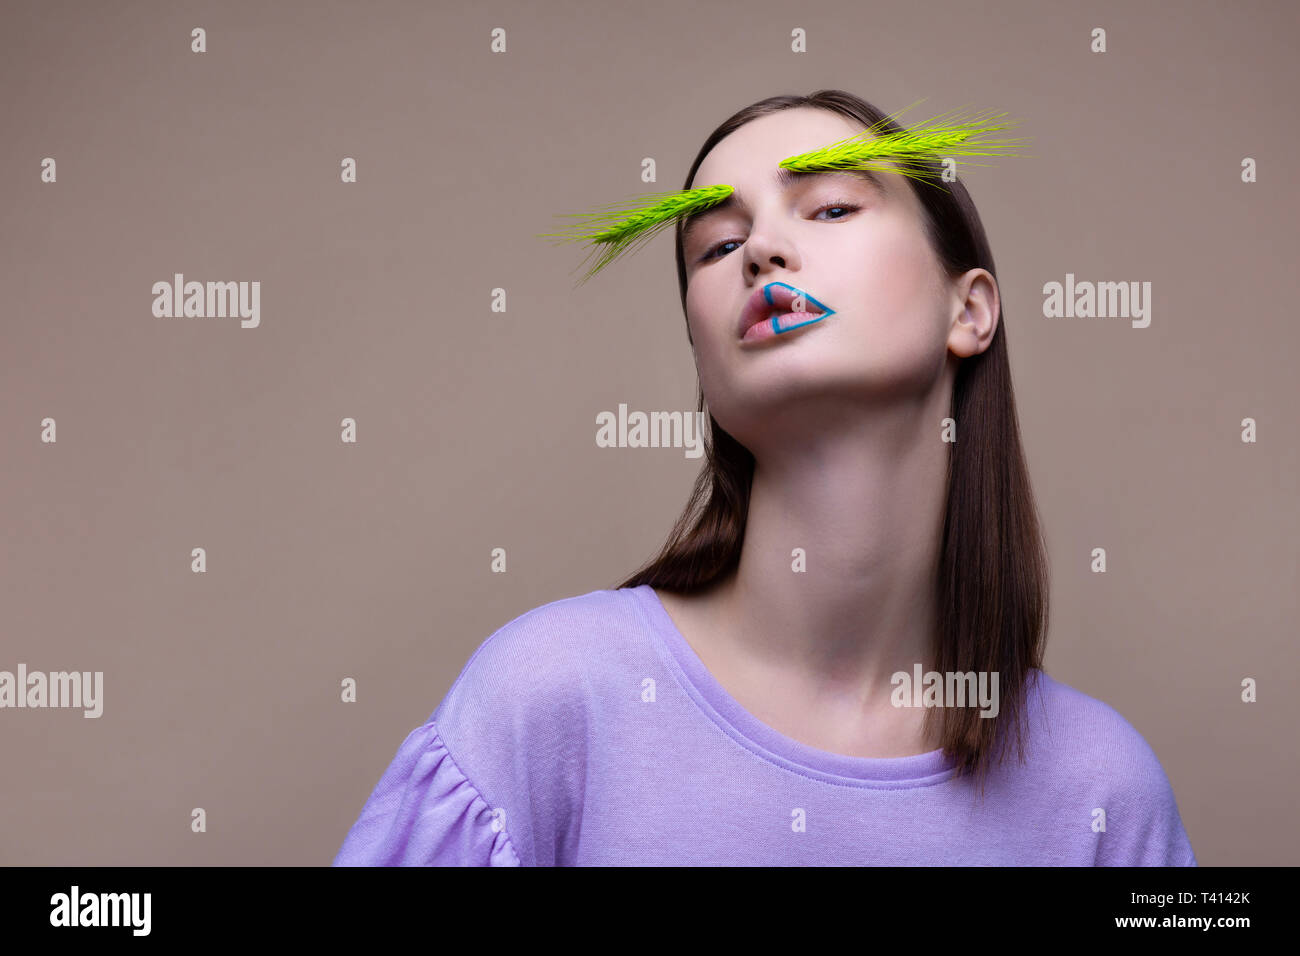 Model with blue lines on lips posing with green spikelet Stock Photo